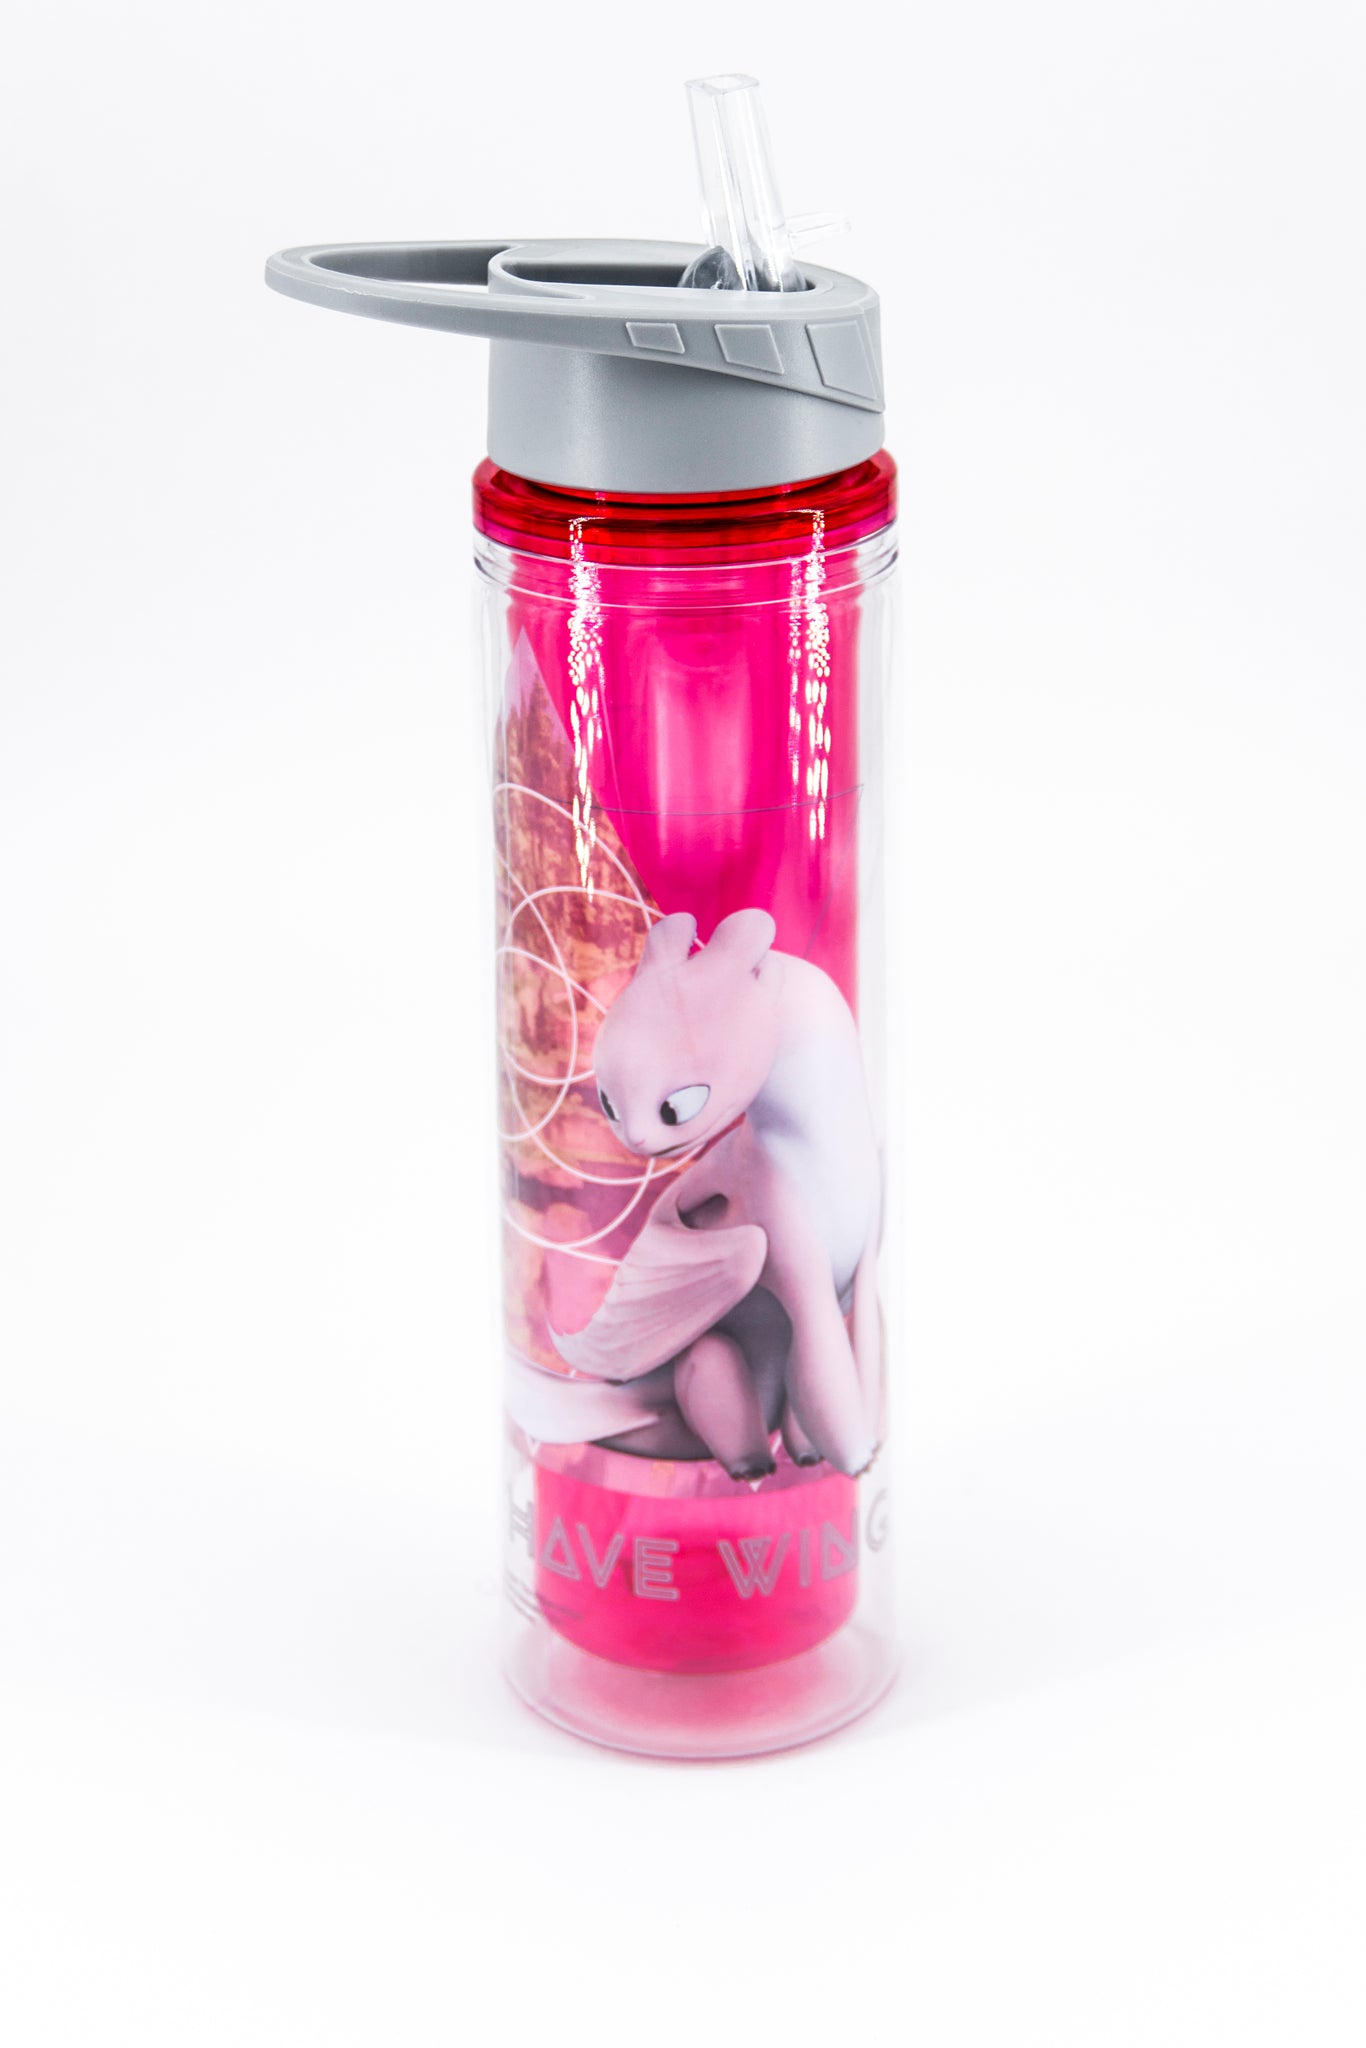 How to Train Your Dragon Light Fury Sport Bottle